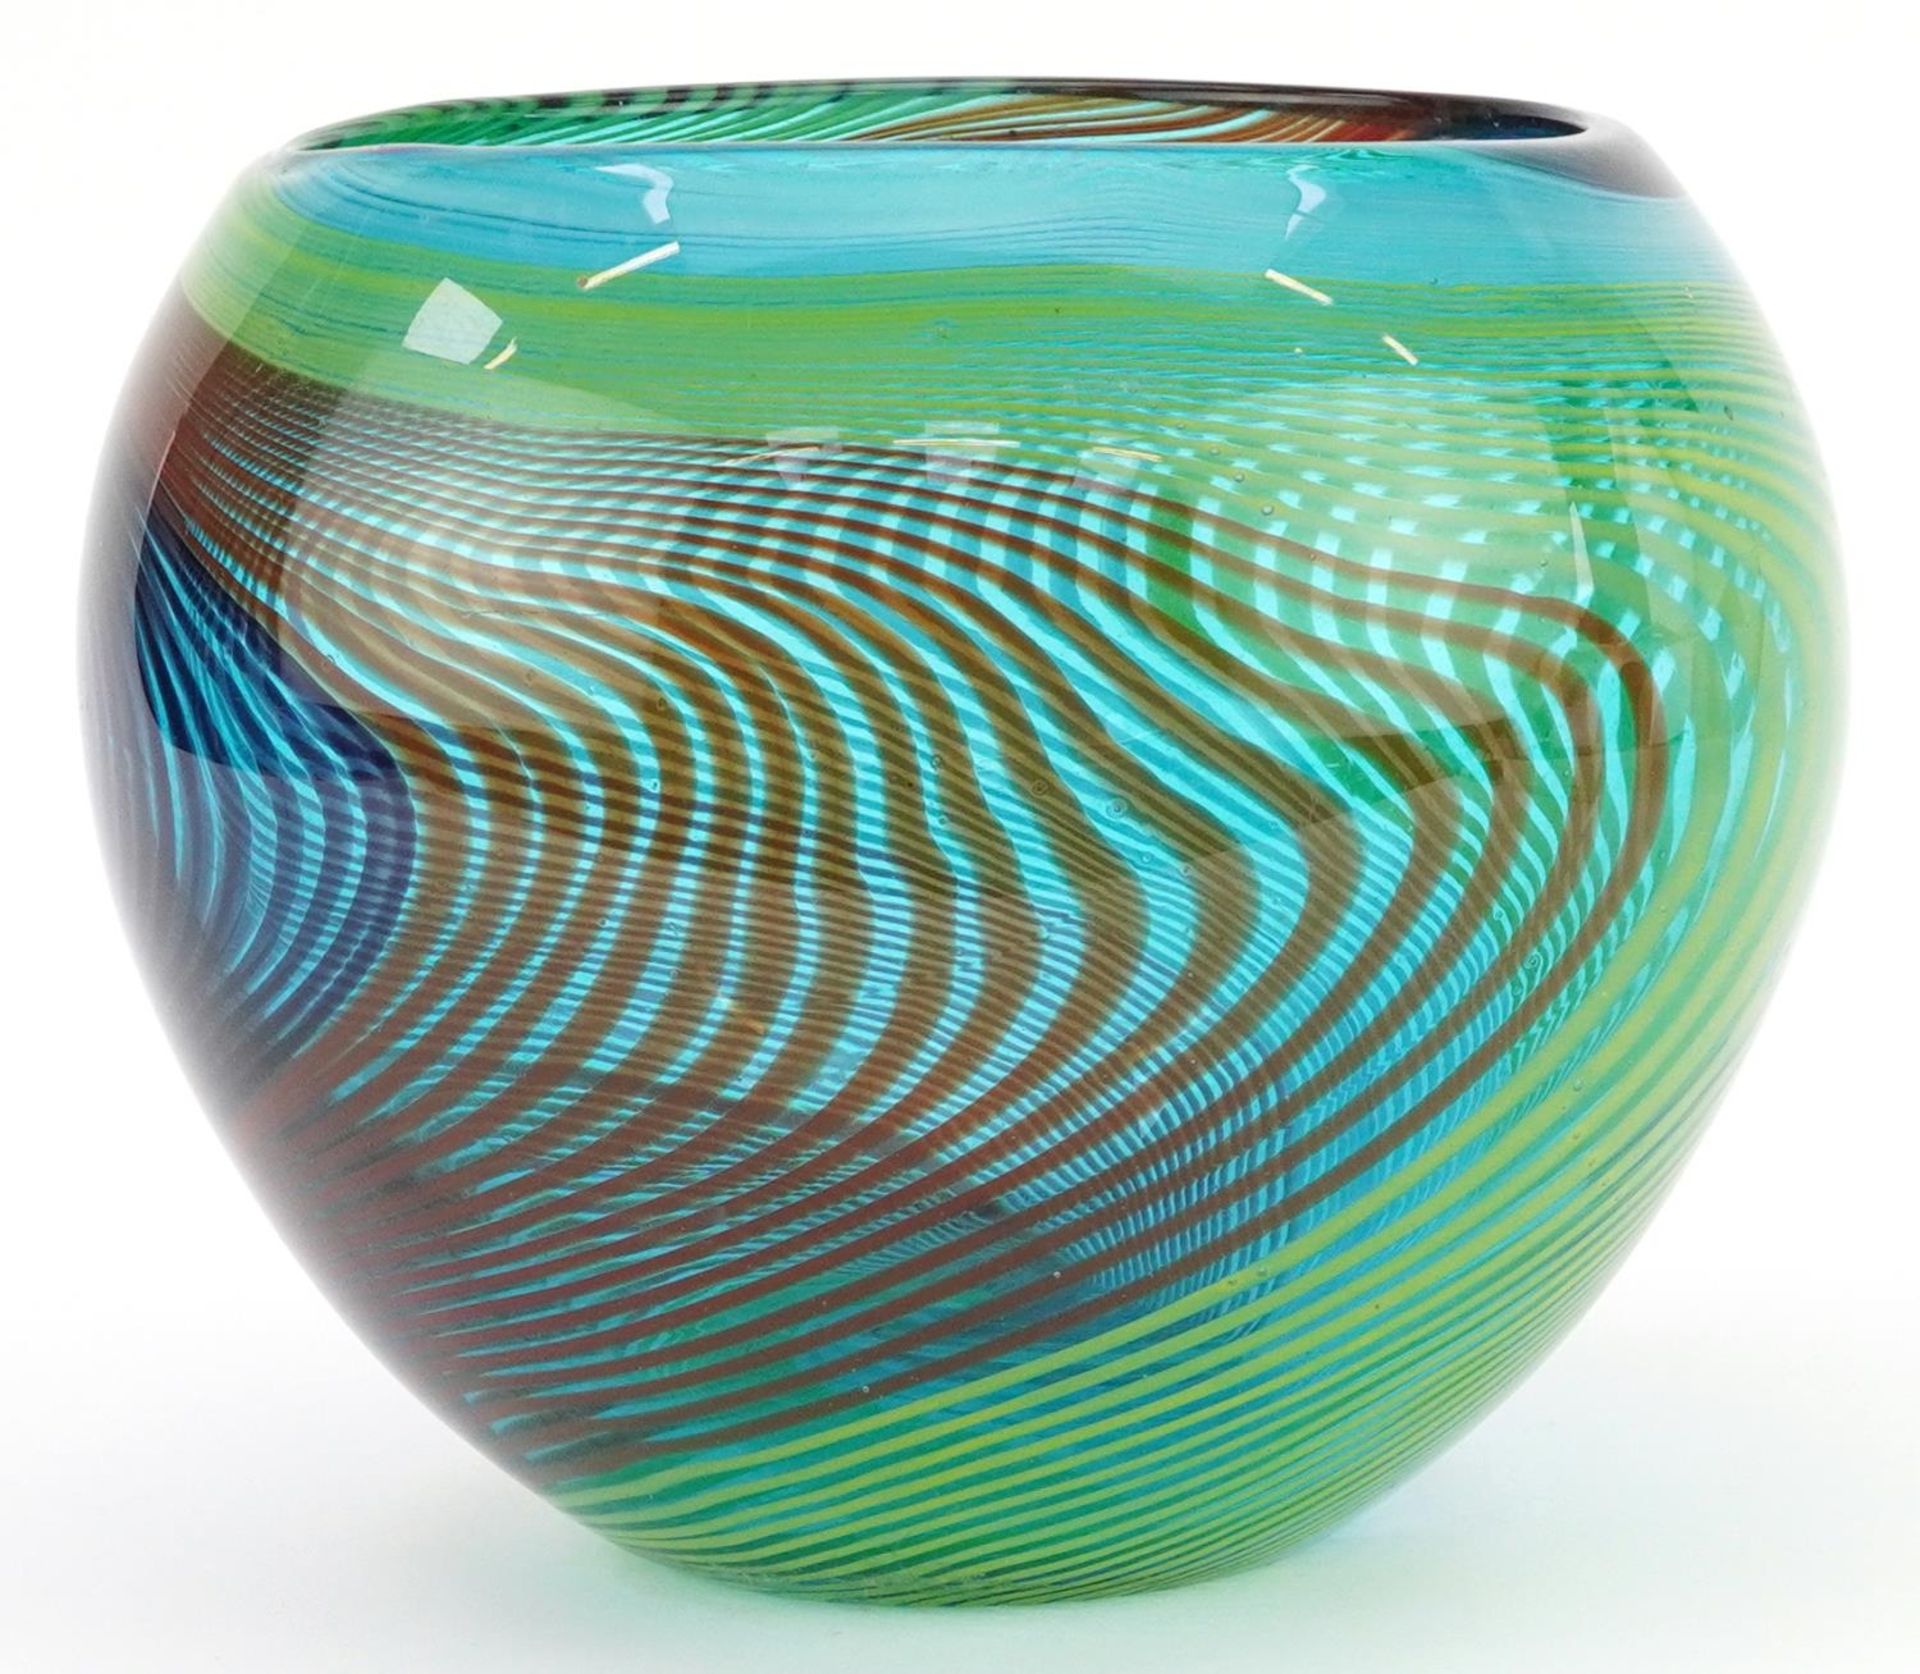 Murano four colour glass vase with combed decoration, 18.5cm high : For further information on